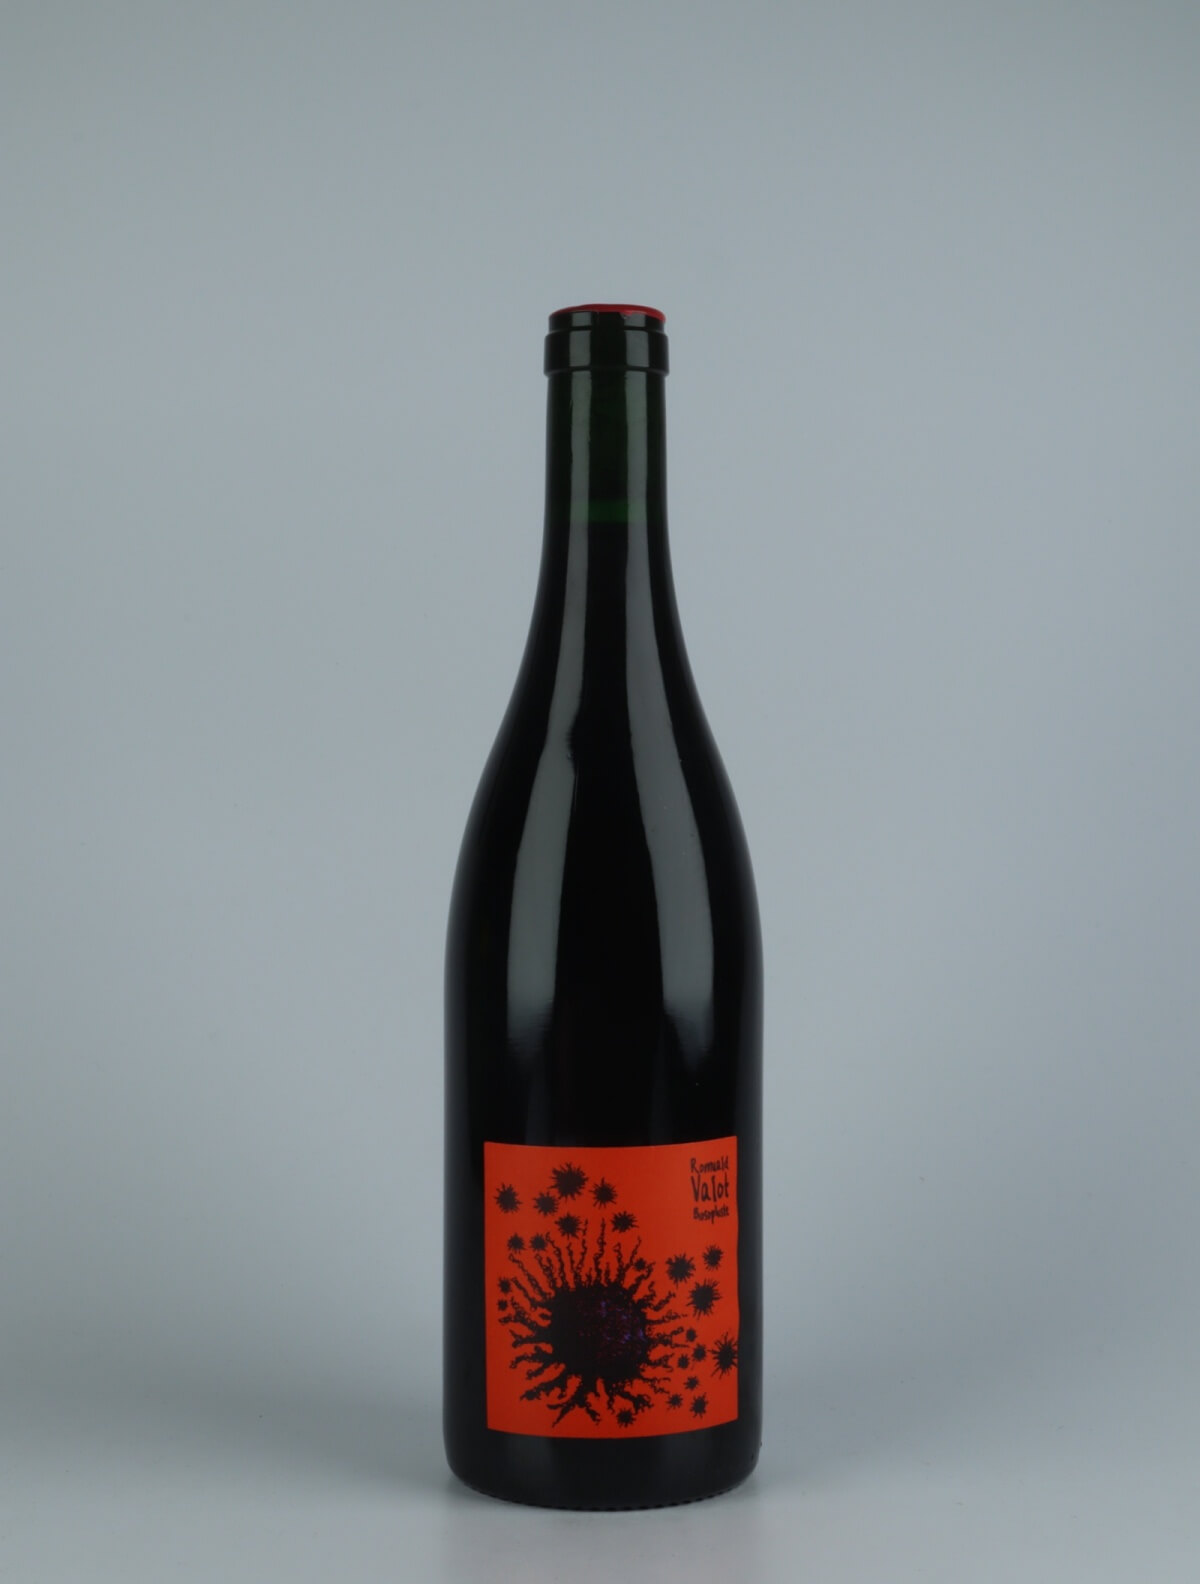 A bottle 2020 Beaujolais Villages Red wine from , Beaujolais in France